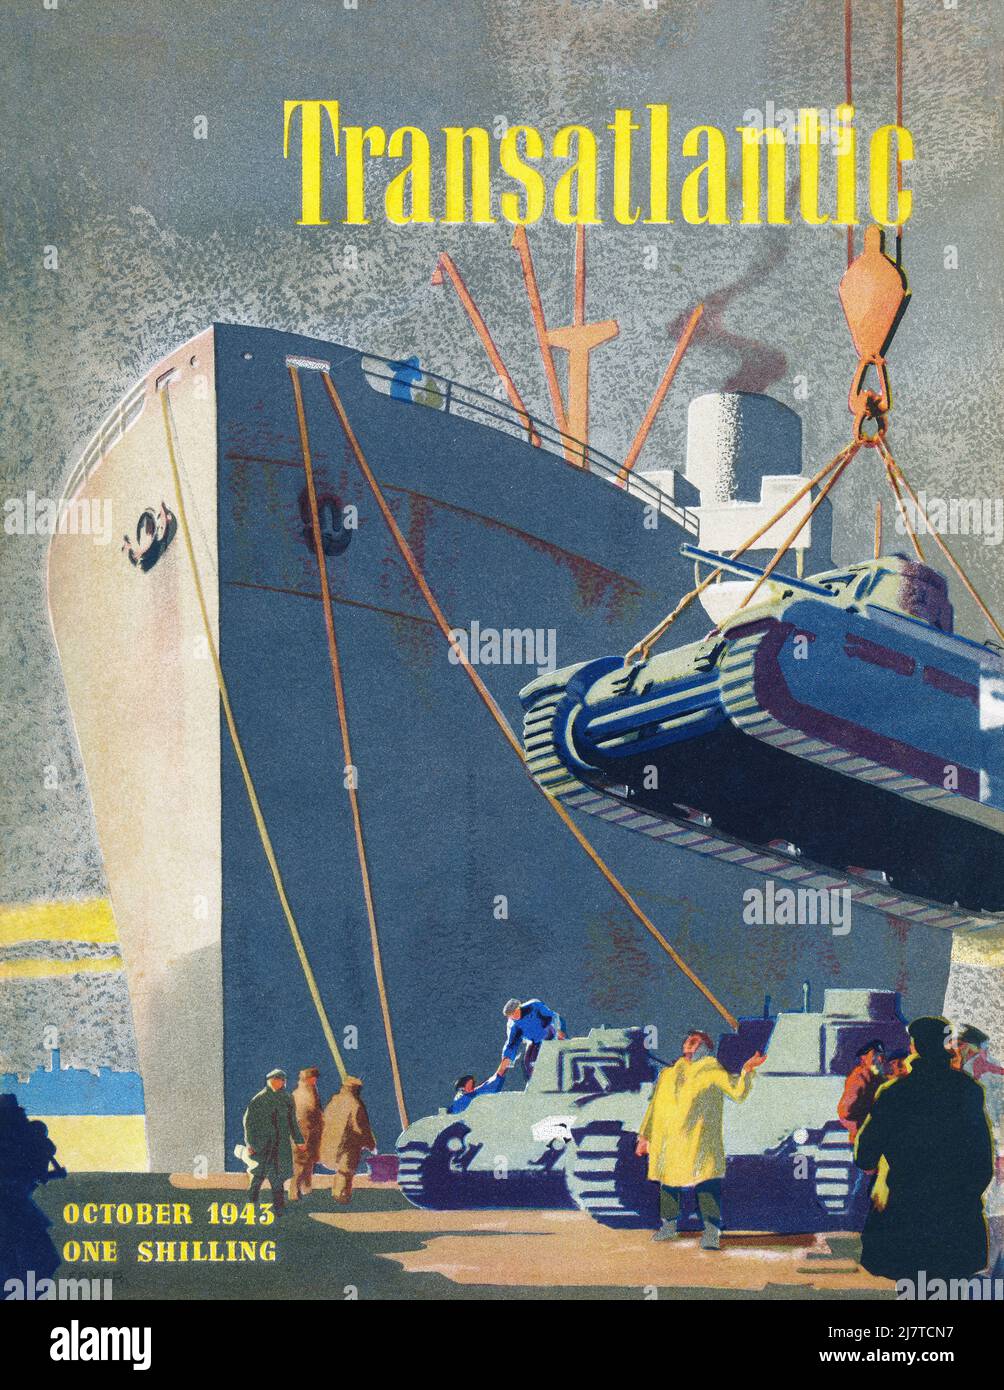 Vintage front cover of Transatlantic magazine from October 1943. Stock Photo